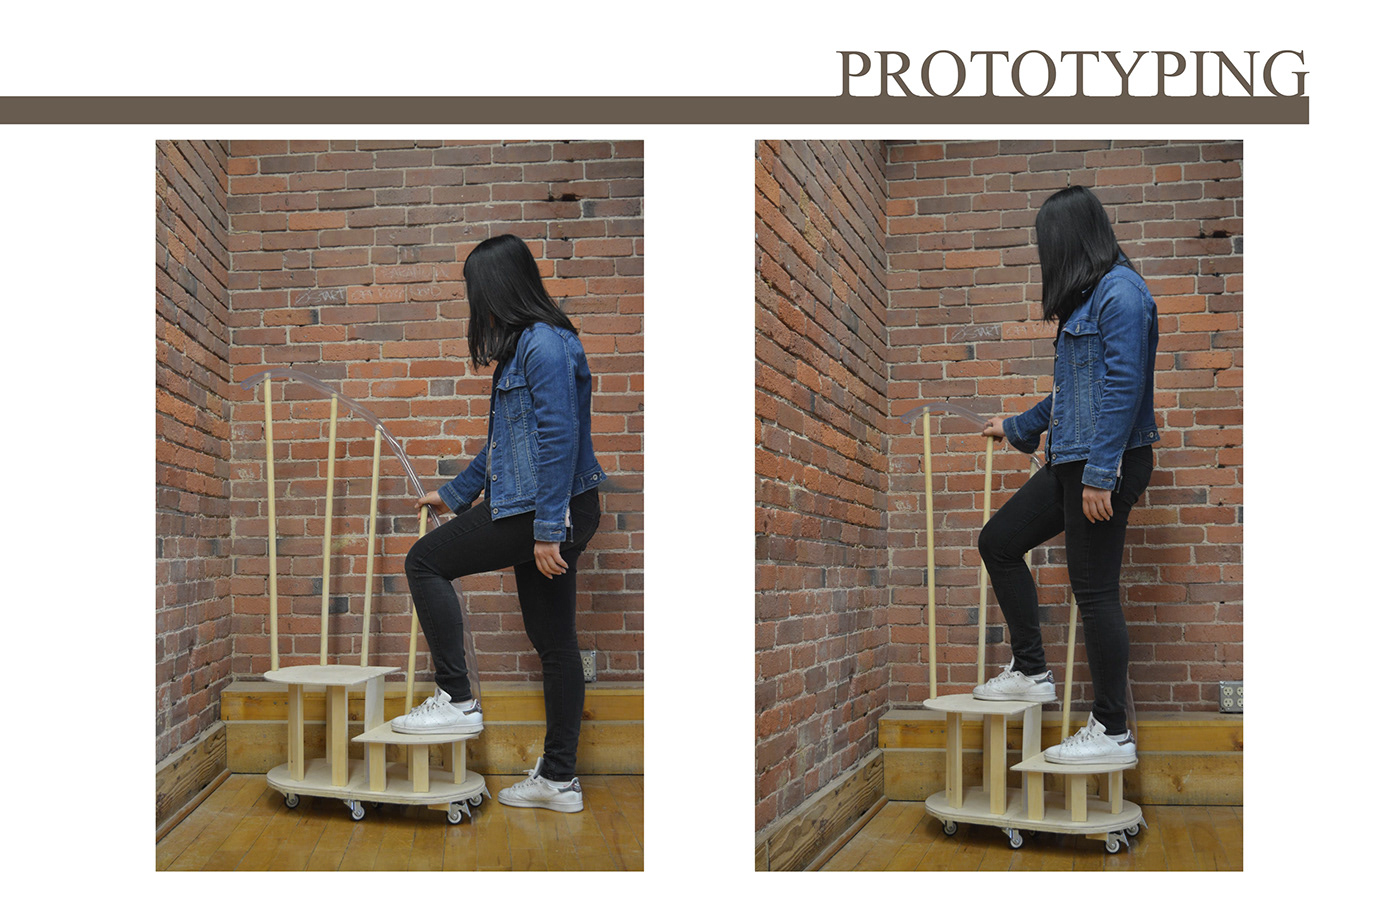 industrial design  design furniture stepping stool stool library research risd wood Solidworks